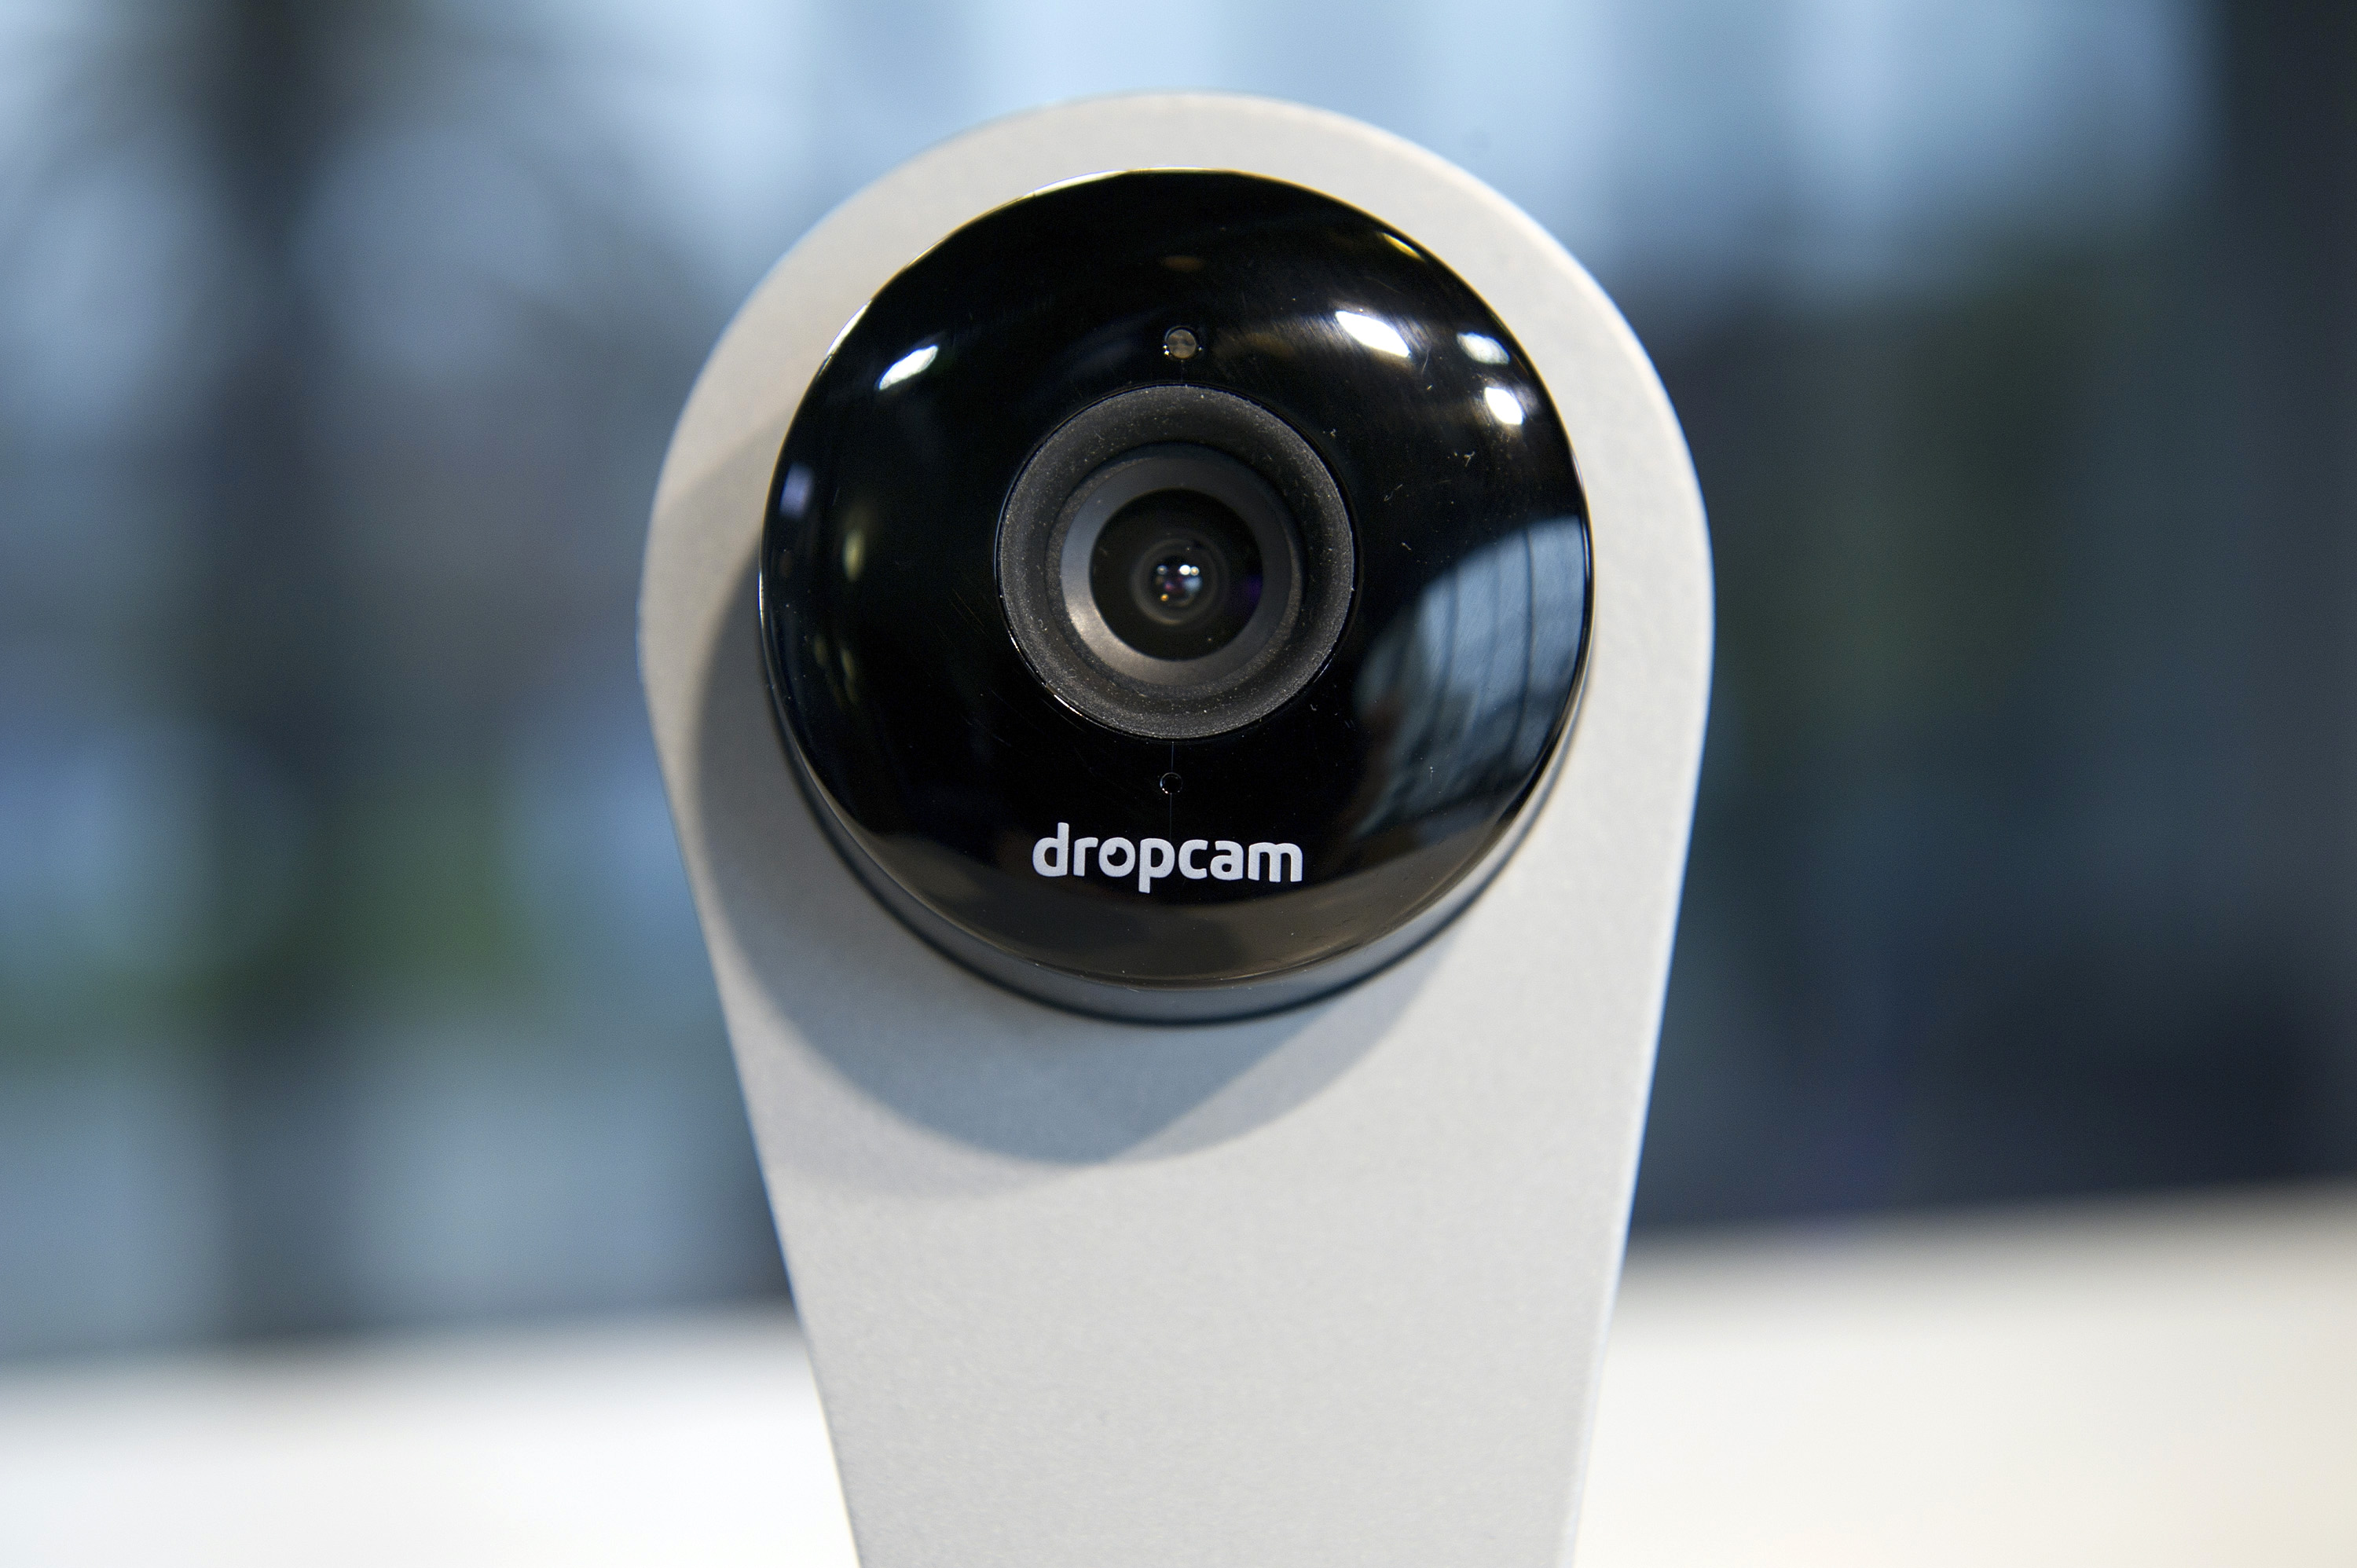 The Dropcam HD Wi-Fi home video-monitoring camera is displayed for a photograph in San Francisco, California, U.S., on Wednesday, May 16, 2012. (David Paul Morris/Bloomberg—Getty Images)